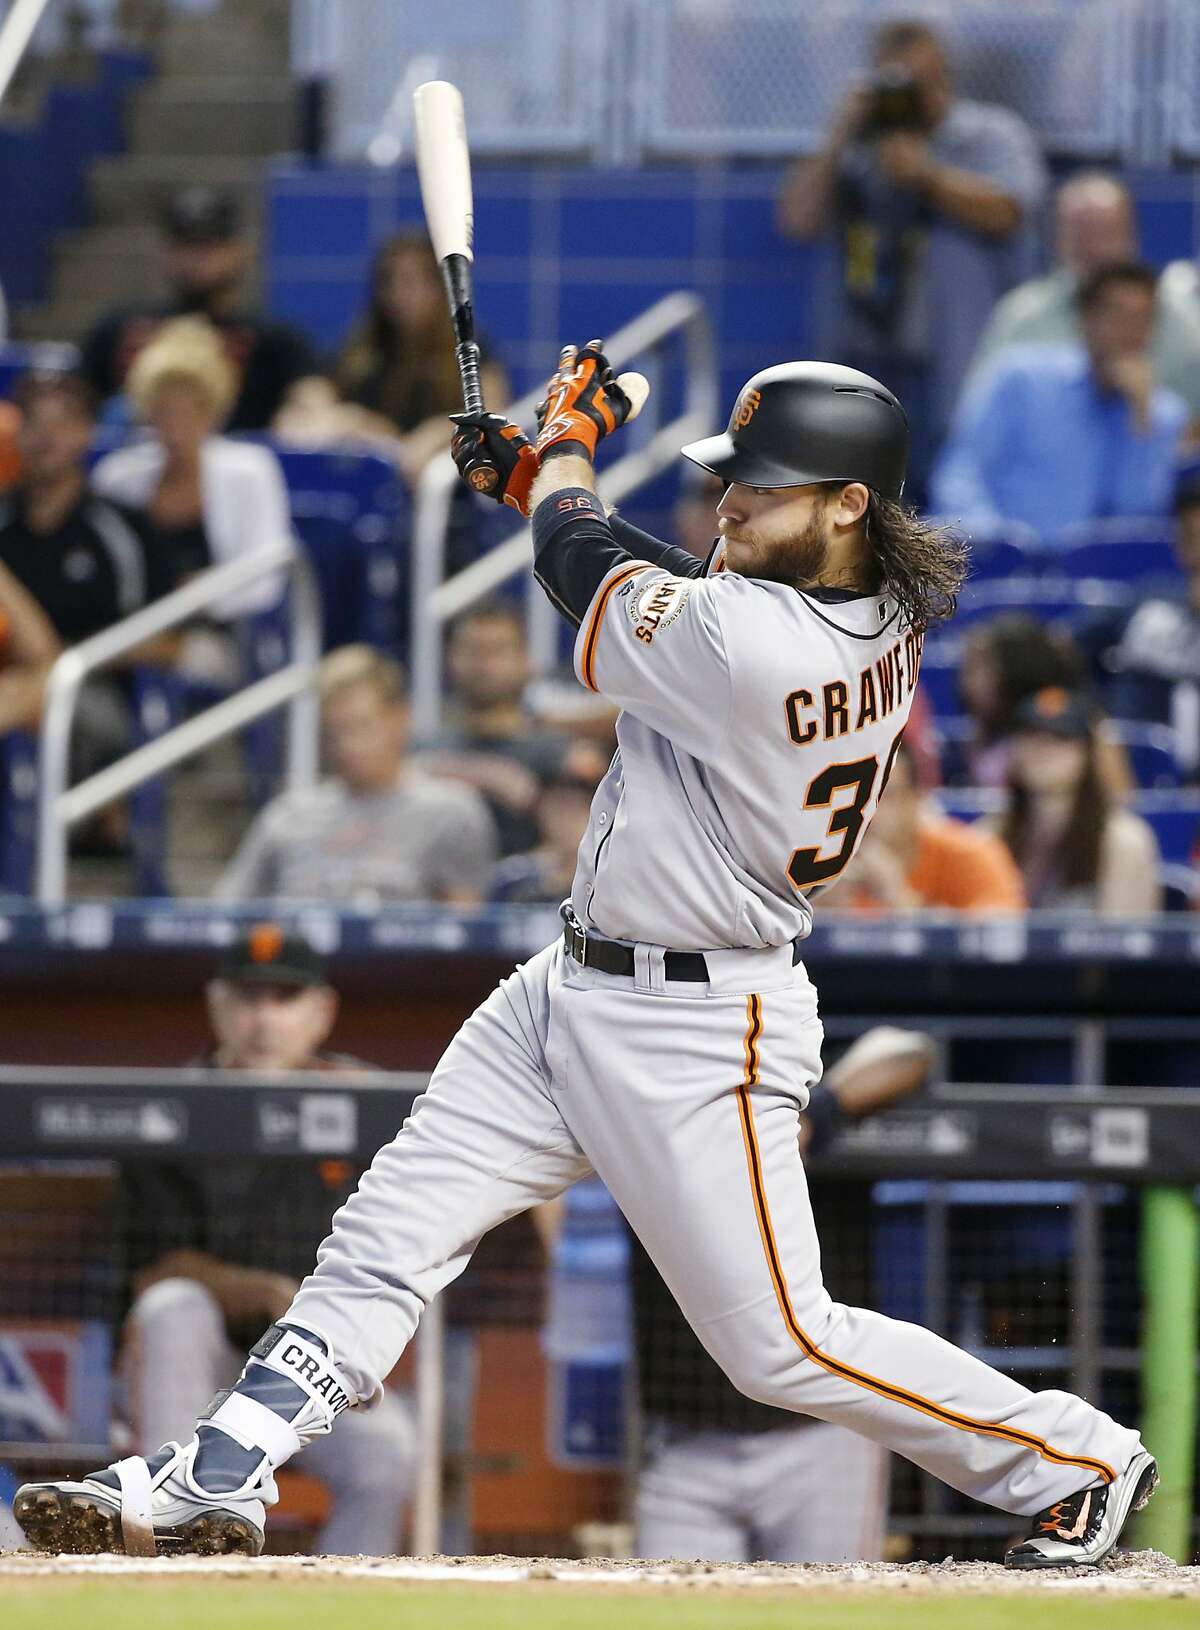 San Francisco Giants' Brandon Crawford hits a home run during the fourth inning of a baseball game against the Miami Marlins, Wednesday, Aug. 10, 2016, in Miami. The Giants defeated the Marlins 1-0. (AP Photo/Wilfredo Lee)